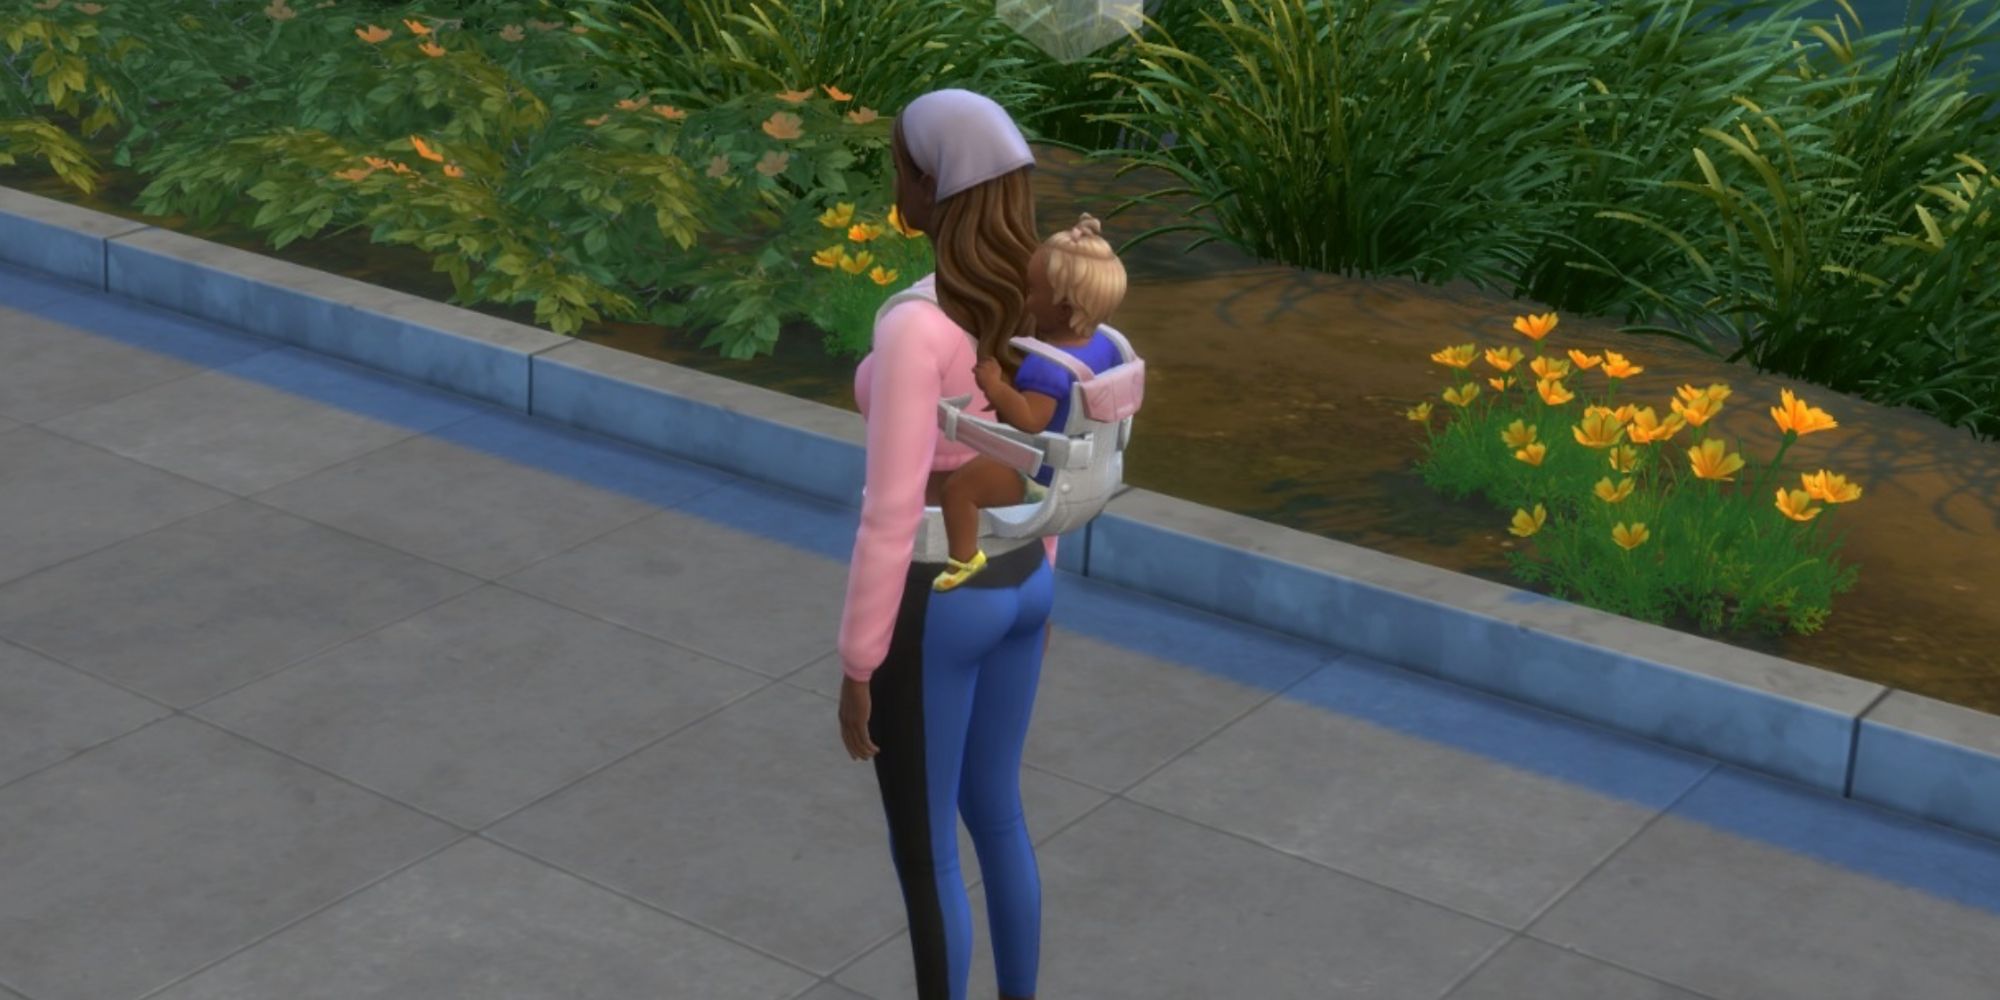 sim carrying a baby on her back